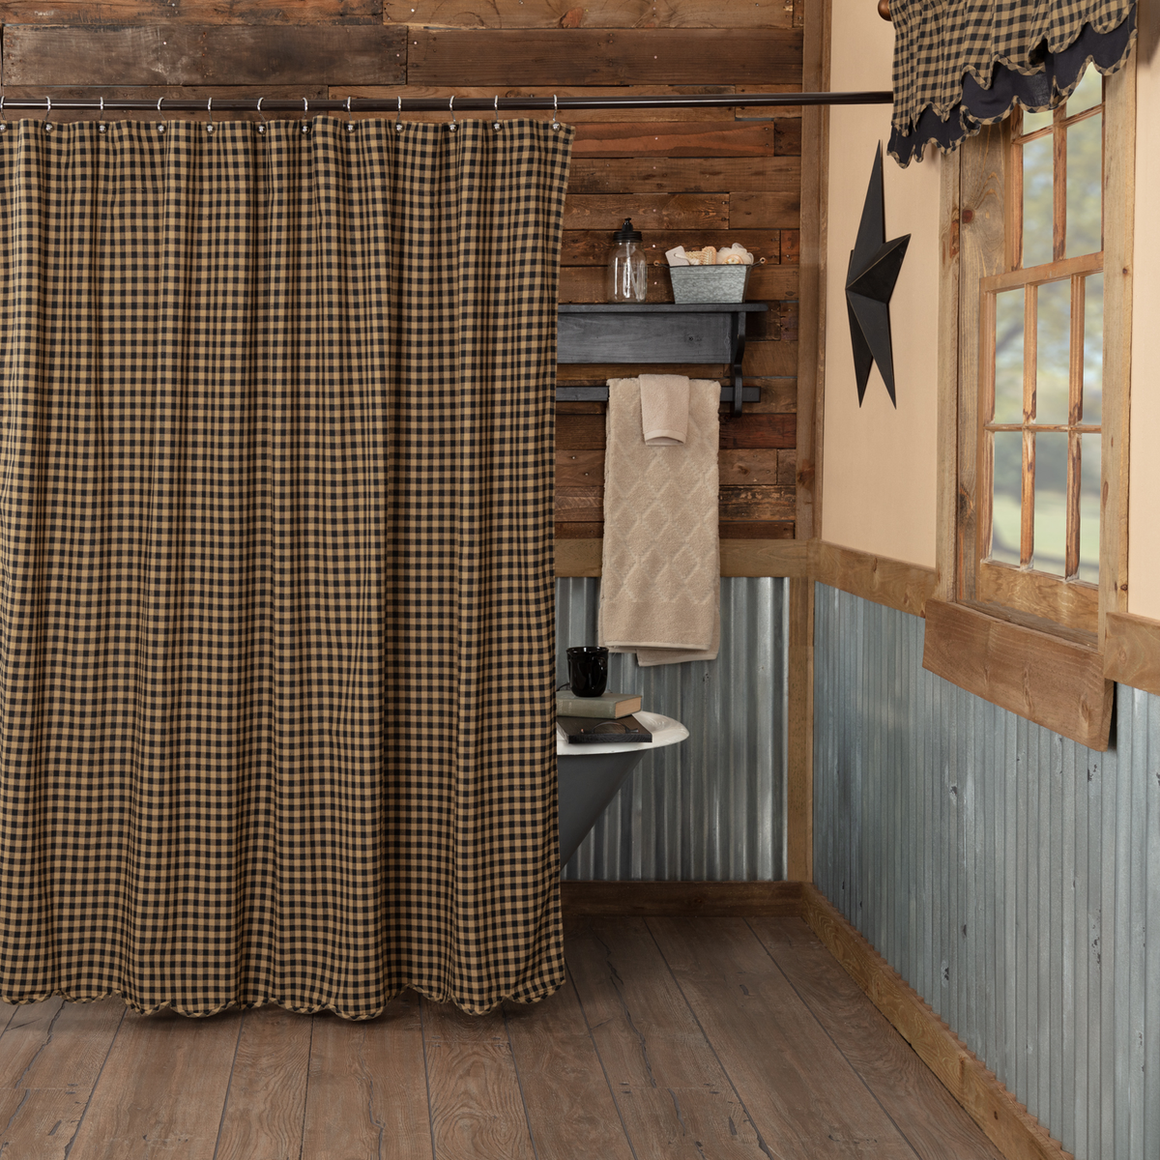 Black Check Shower Curtain